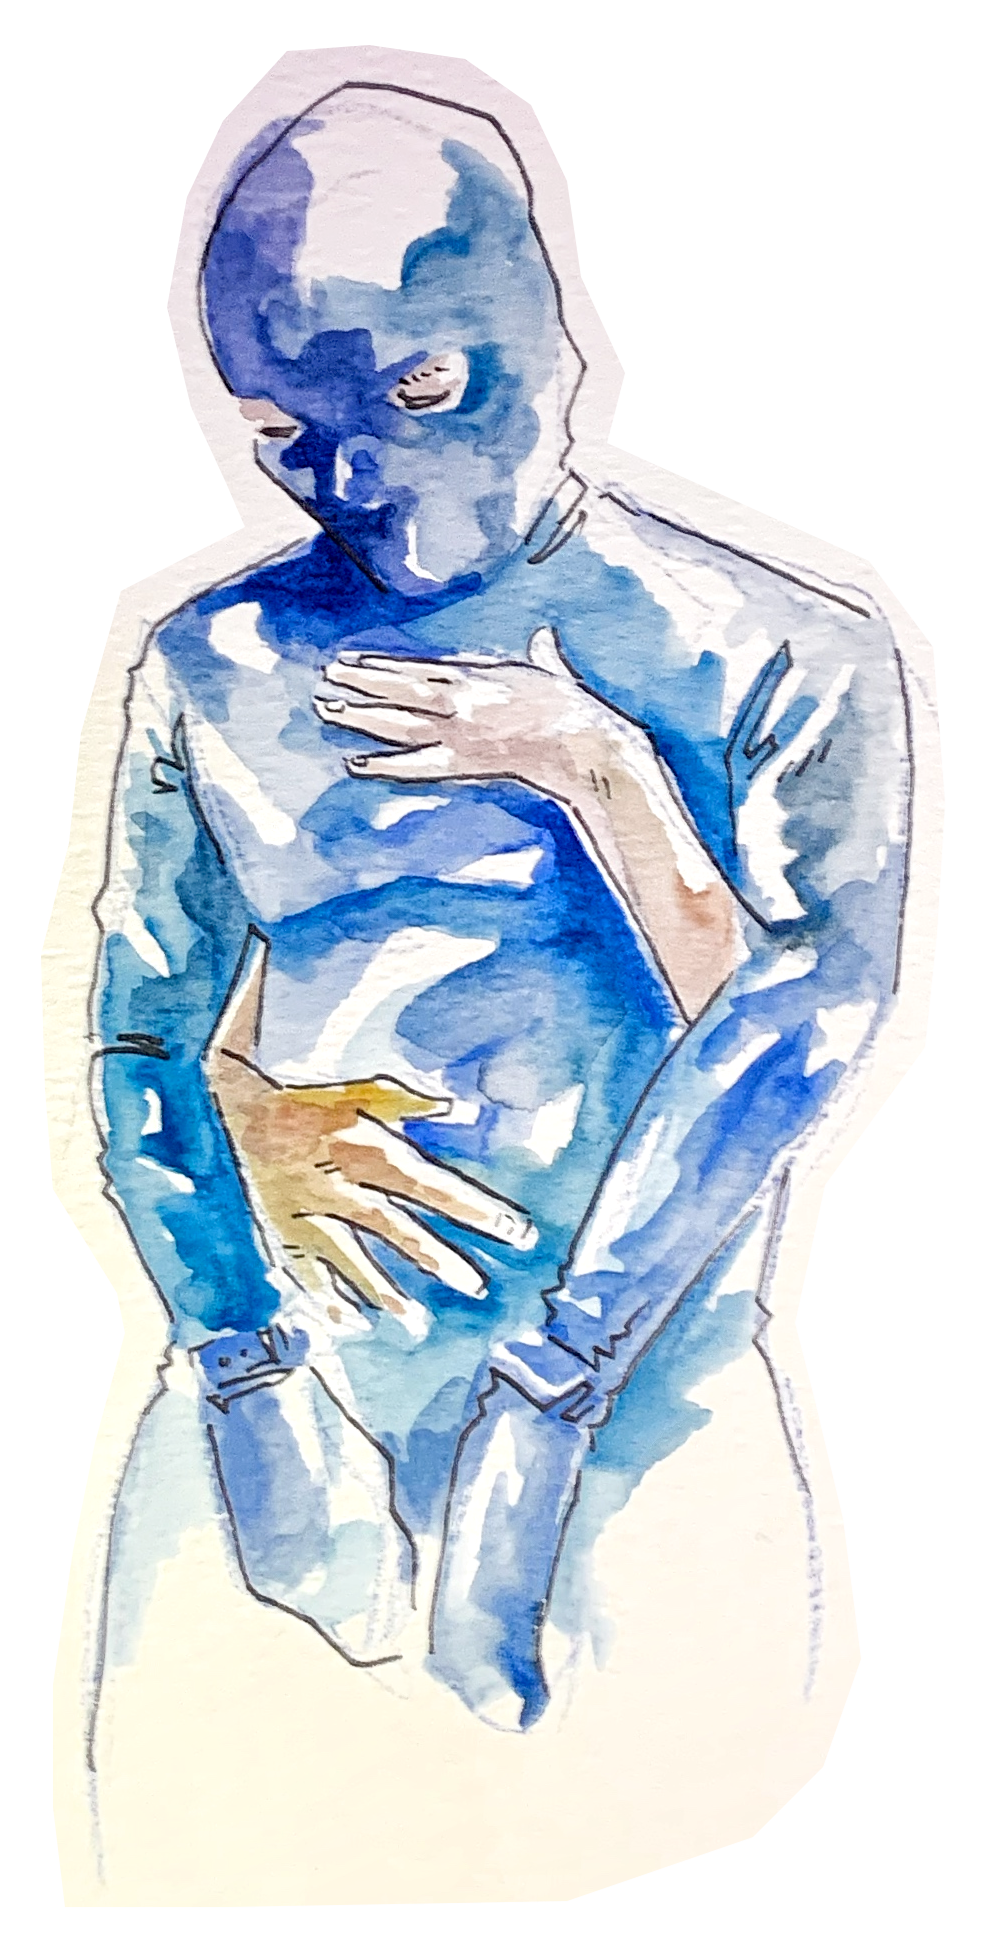 Watercolor painting of man in blue catsuit and mask